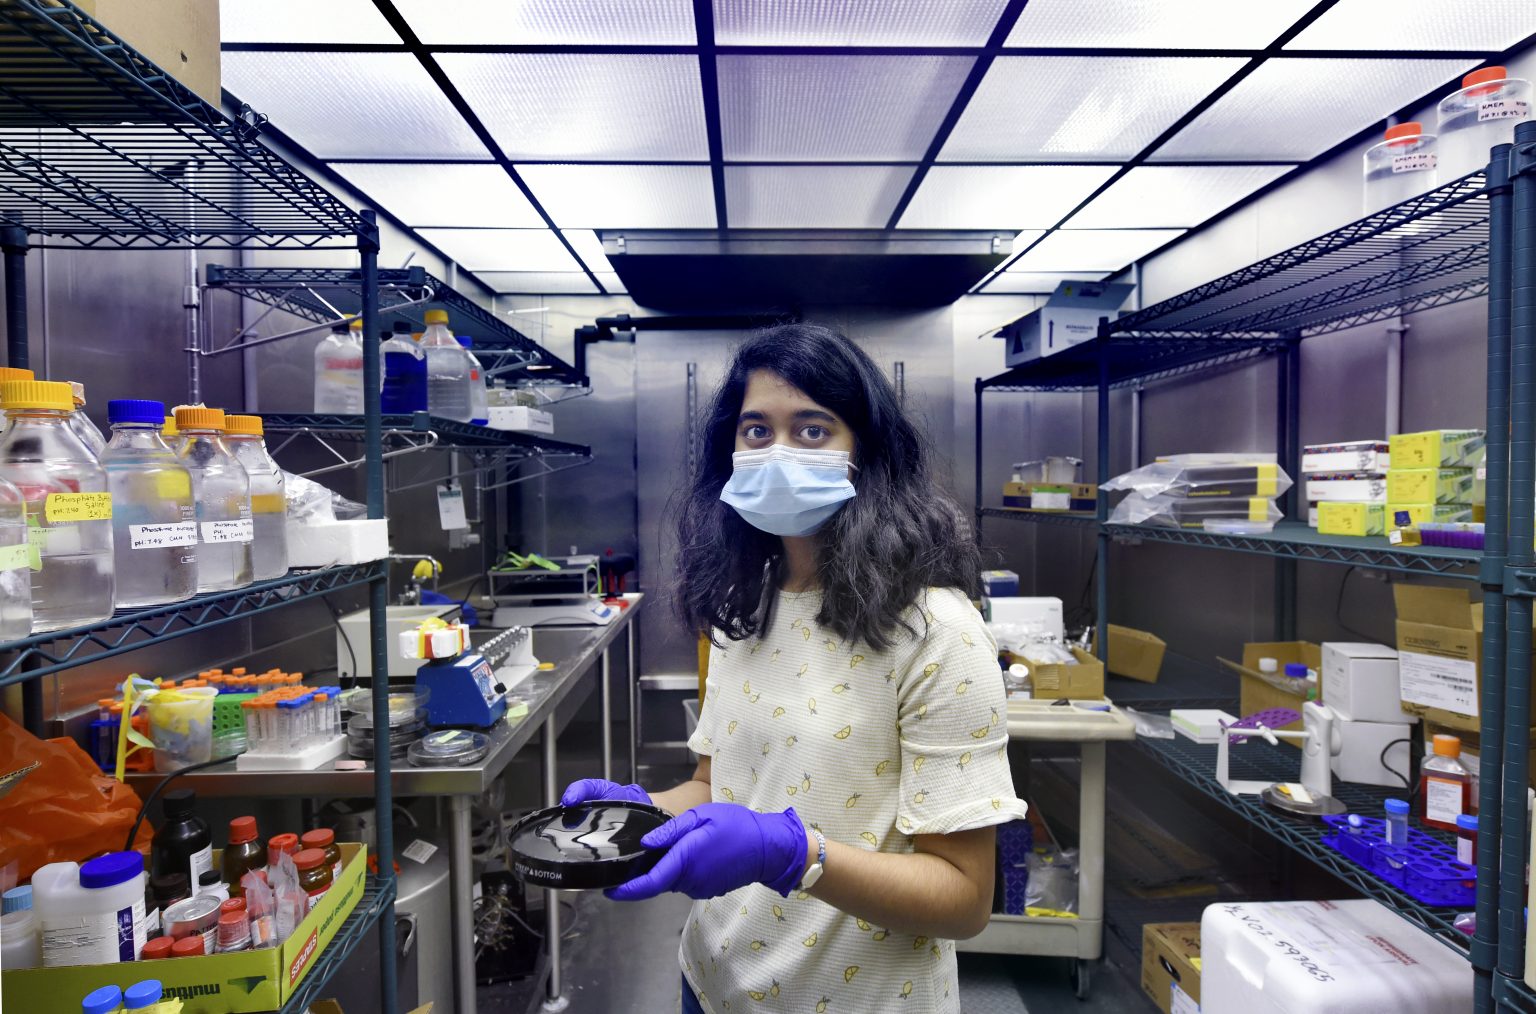 A girl stands in a lab, holding a dish and wearing a face mask.